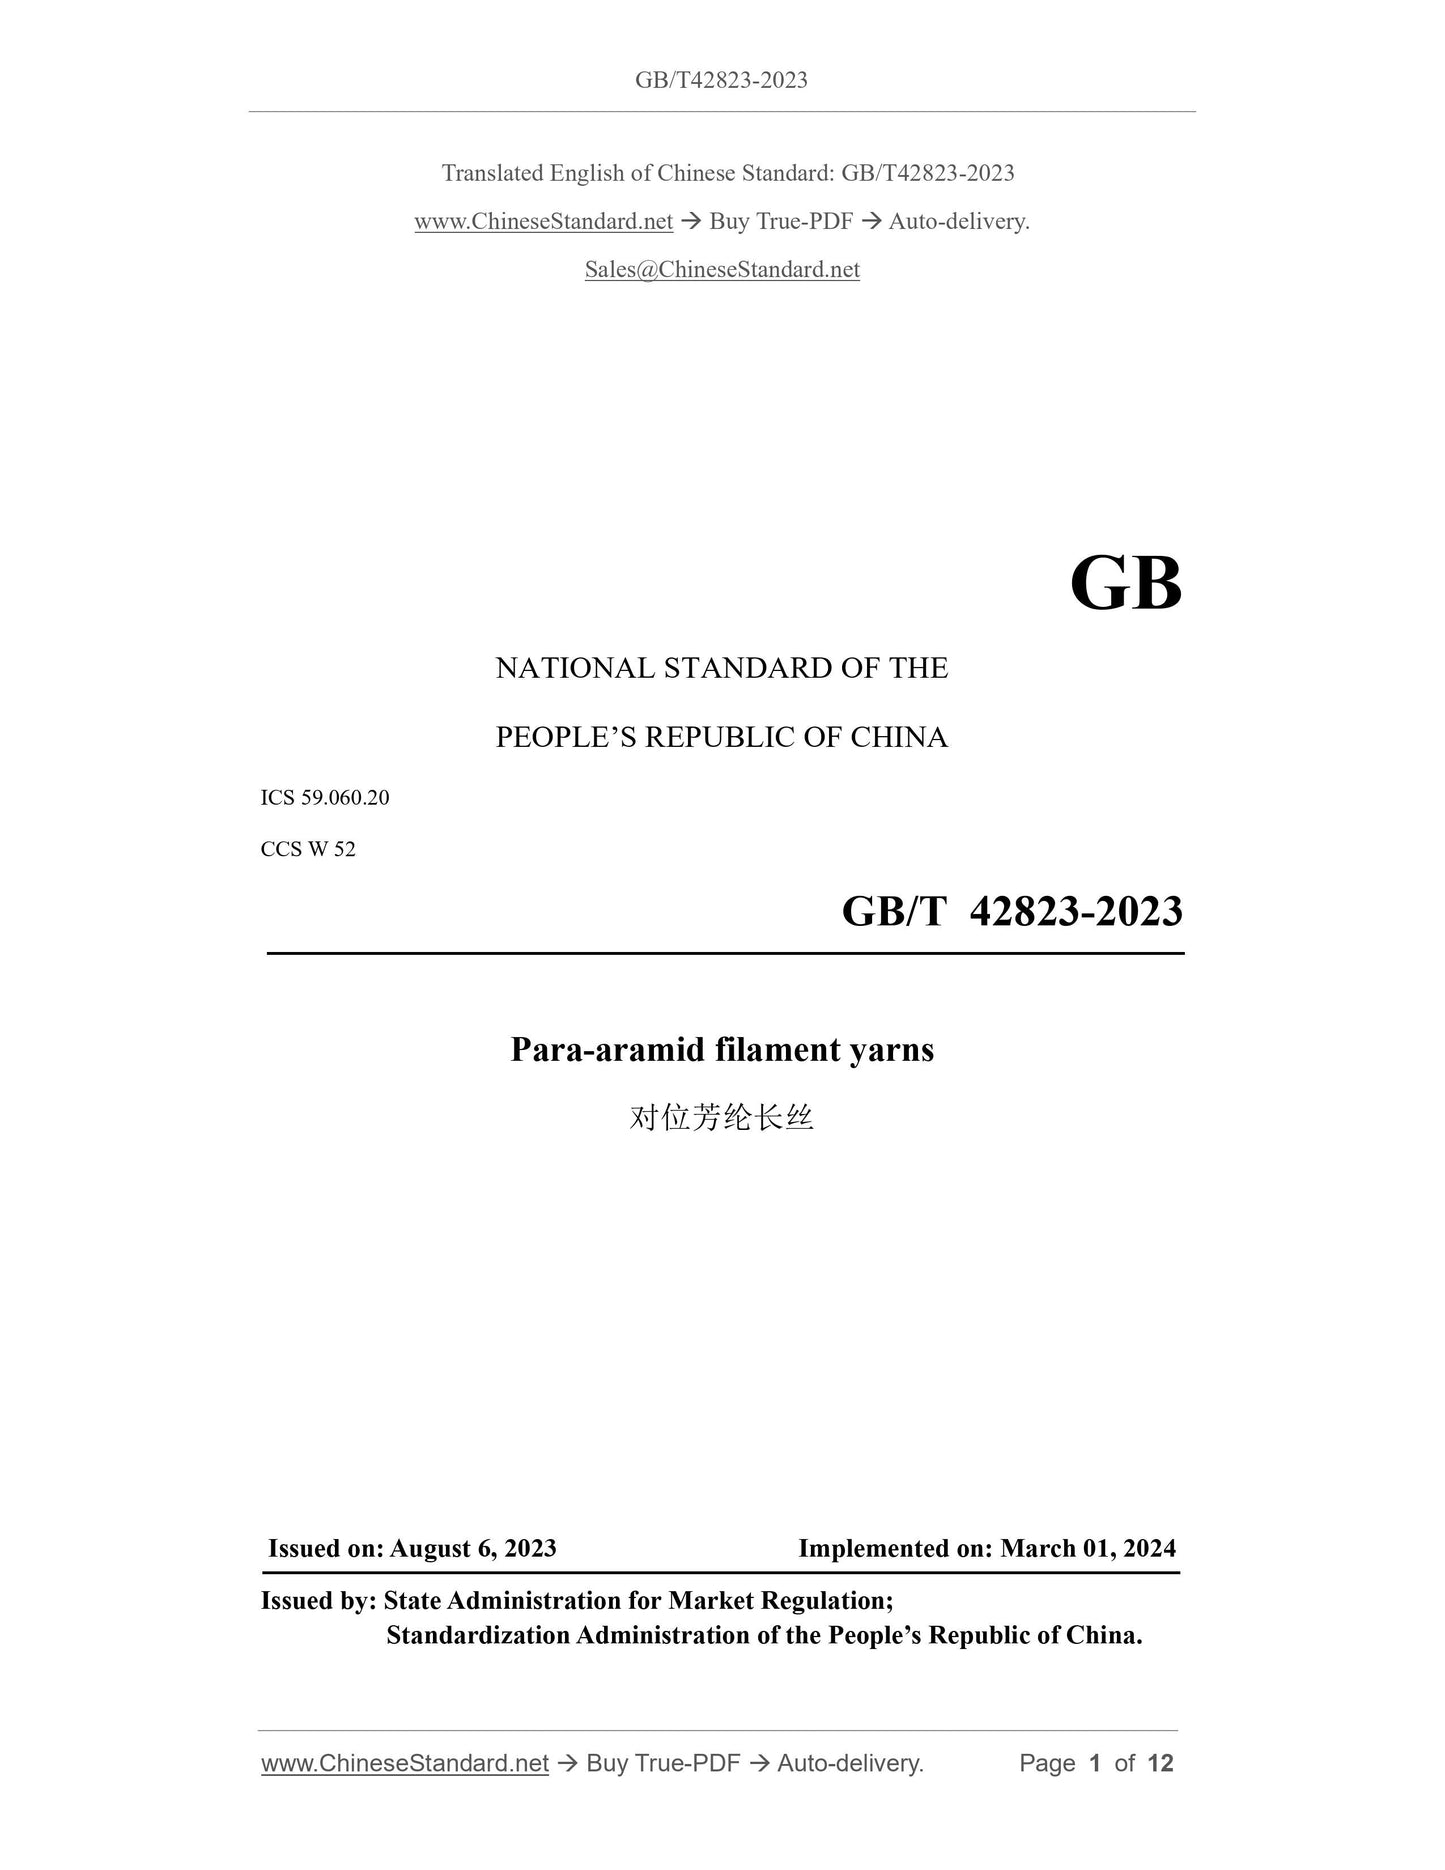 GB/T 42823-2023 Page 1